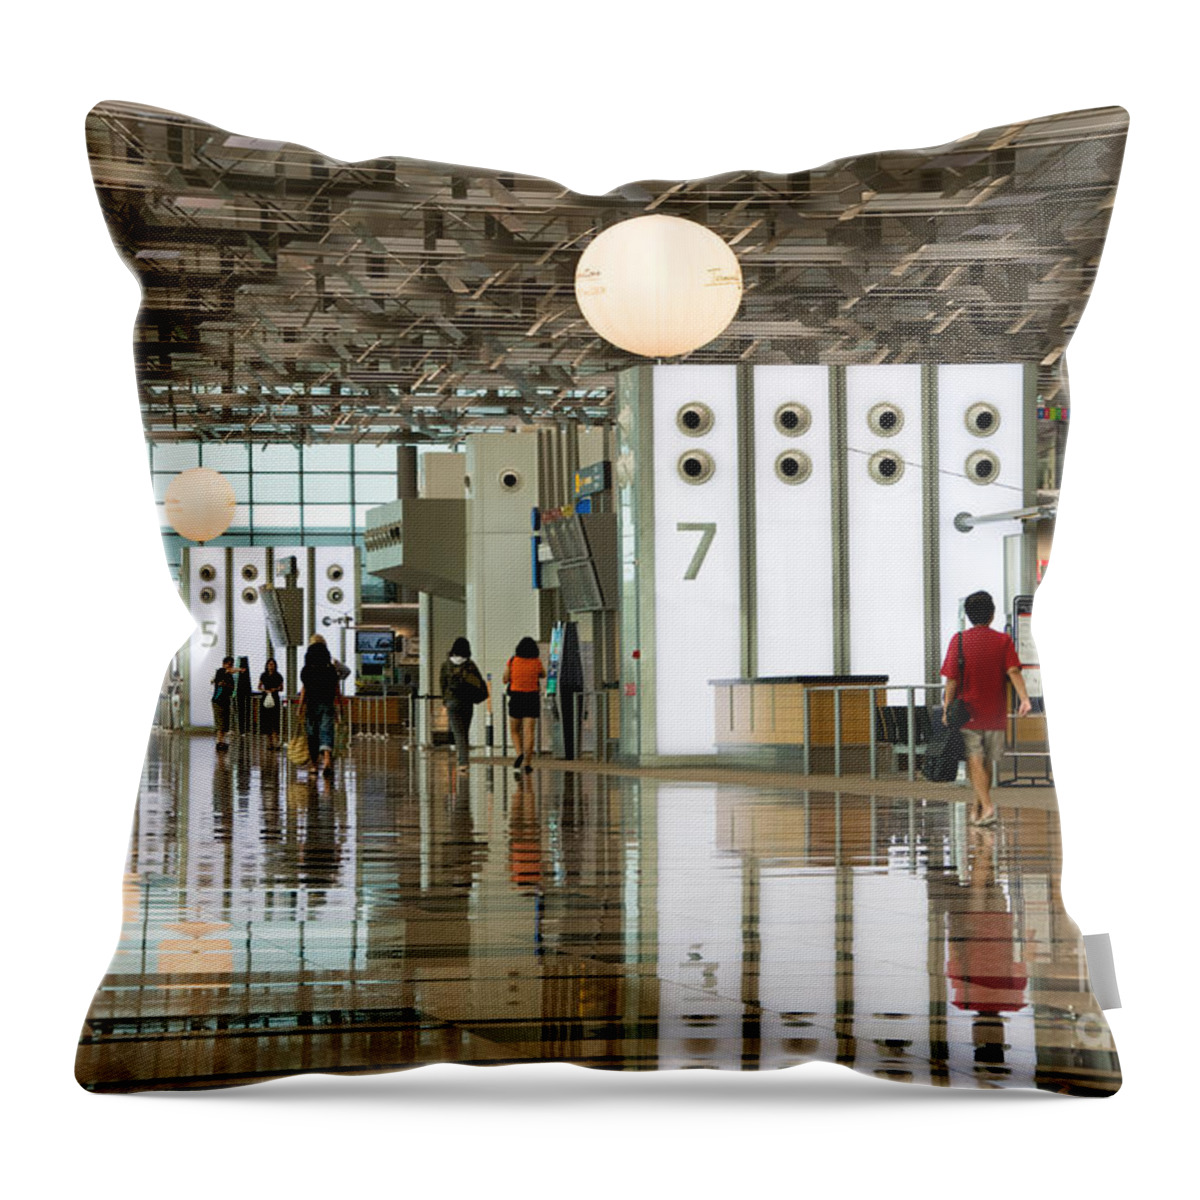 Singapore Throw Pillow featuring the photograph Singapore Changi Airport 02 by Rick Piper Photography